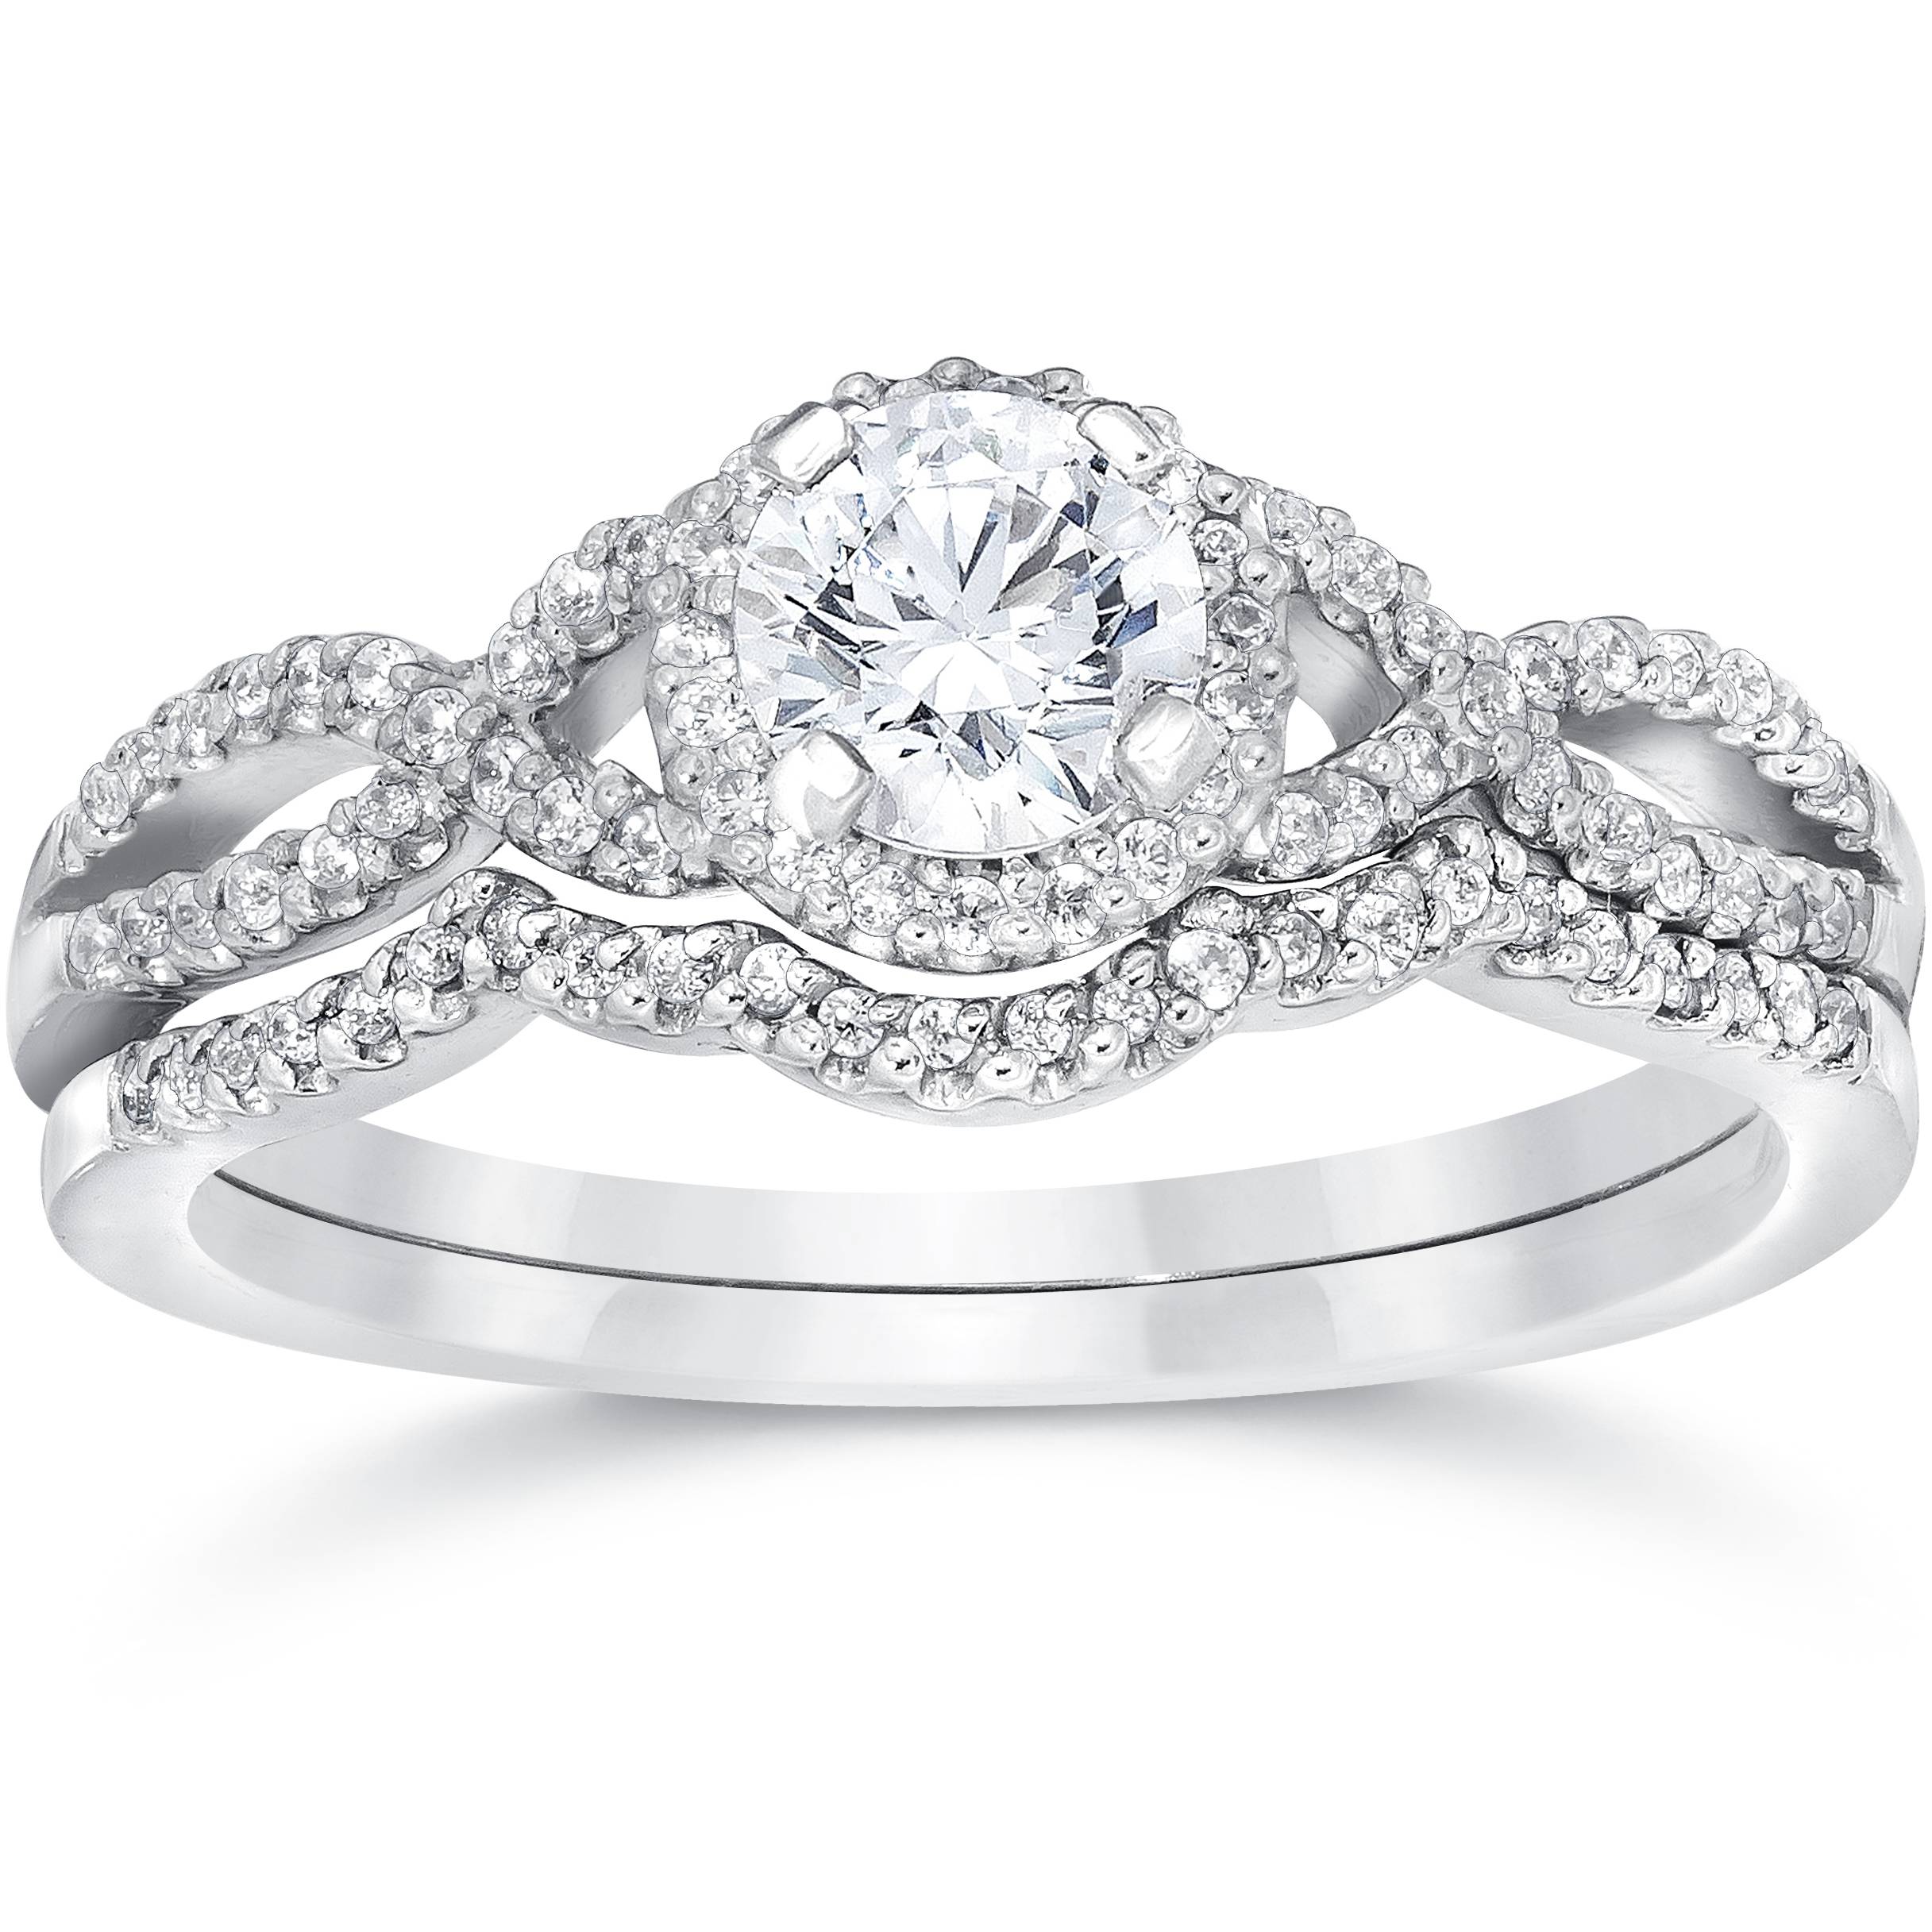 Monogram Infini Engagement Ring, White Gold and Diamond - Categories Q9M34A